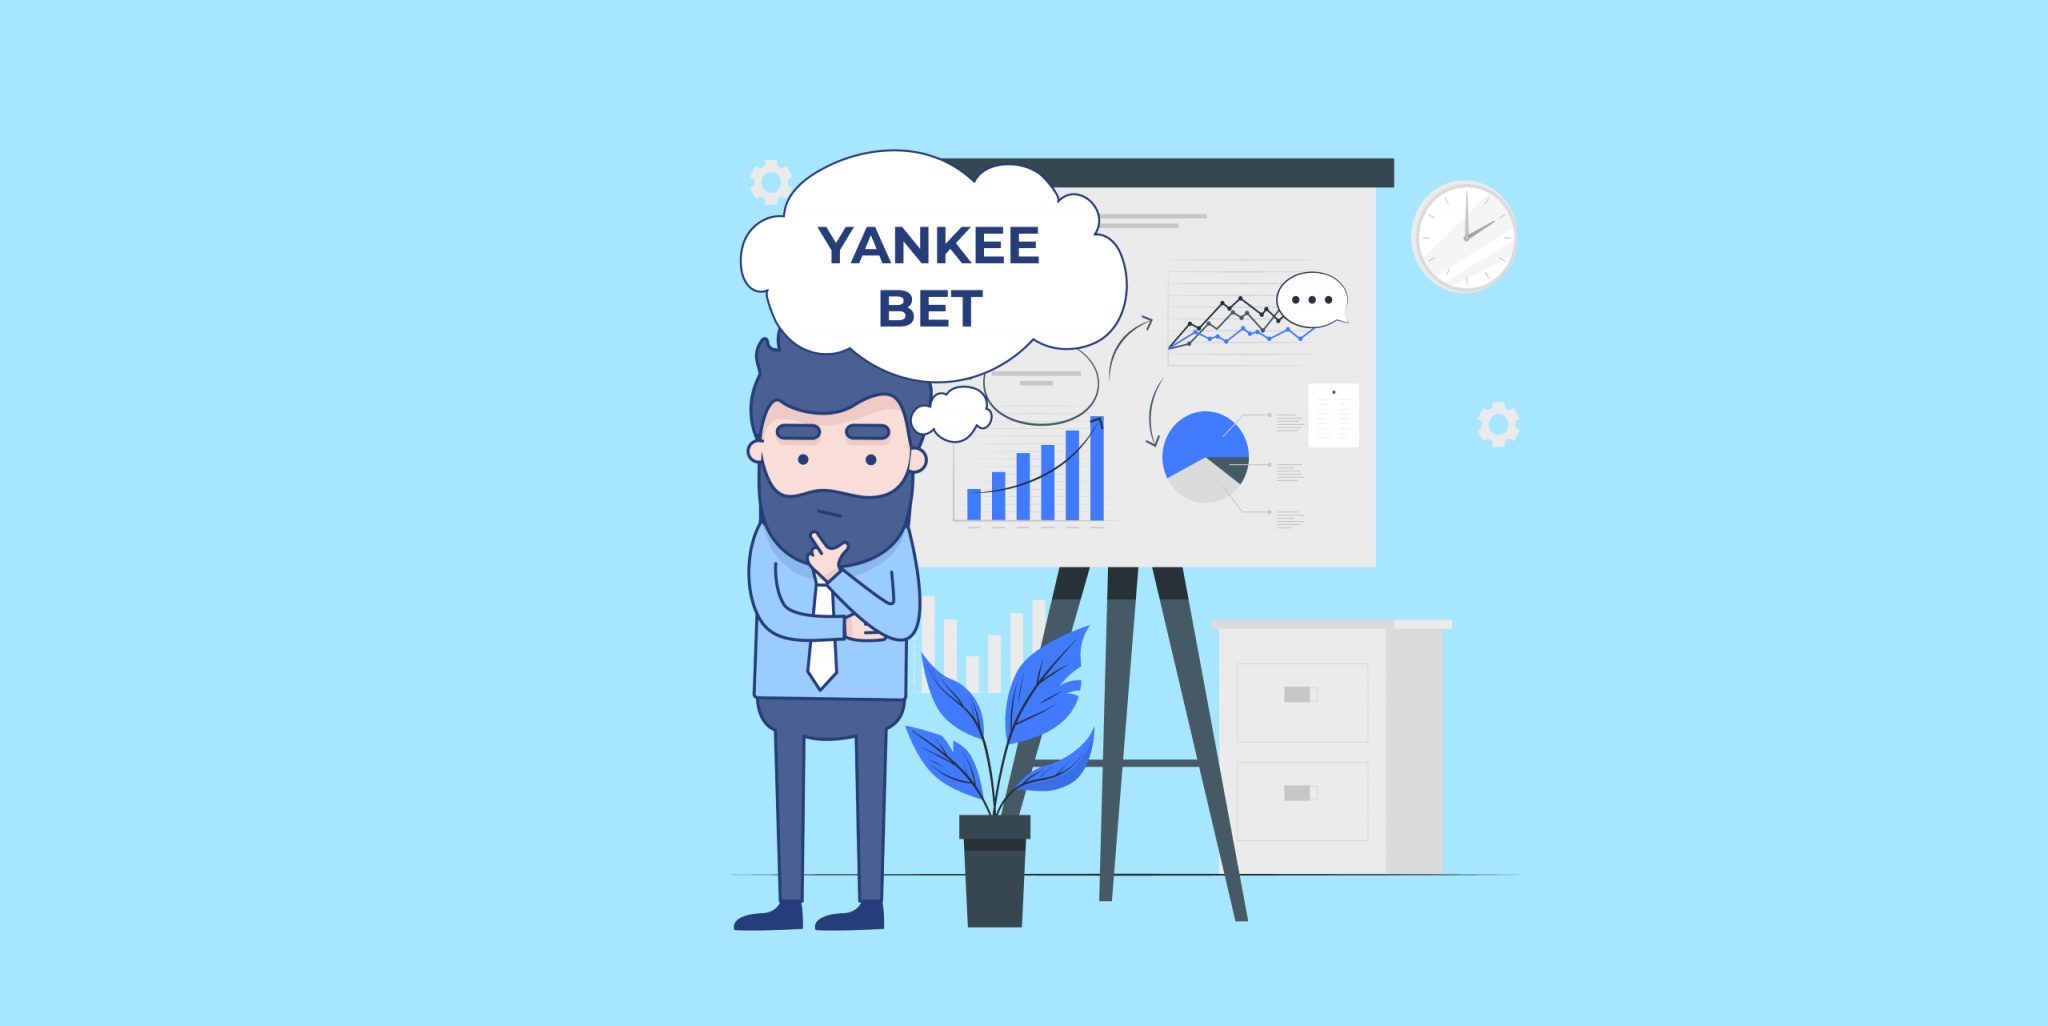 What is a Yankee Bet?